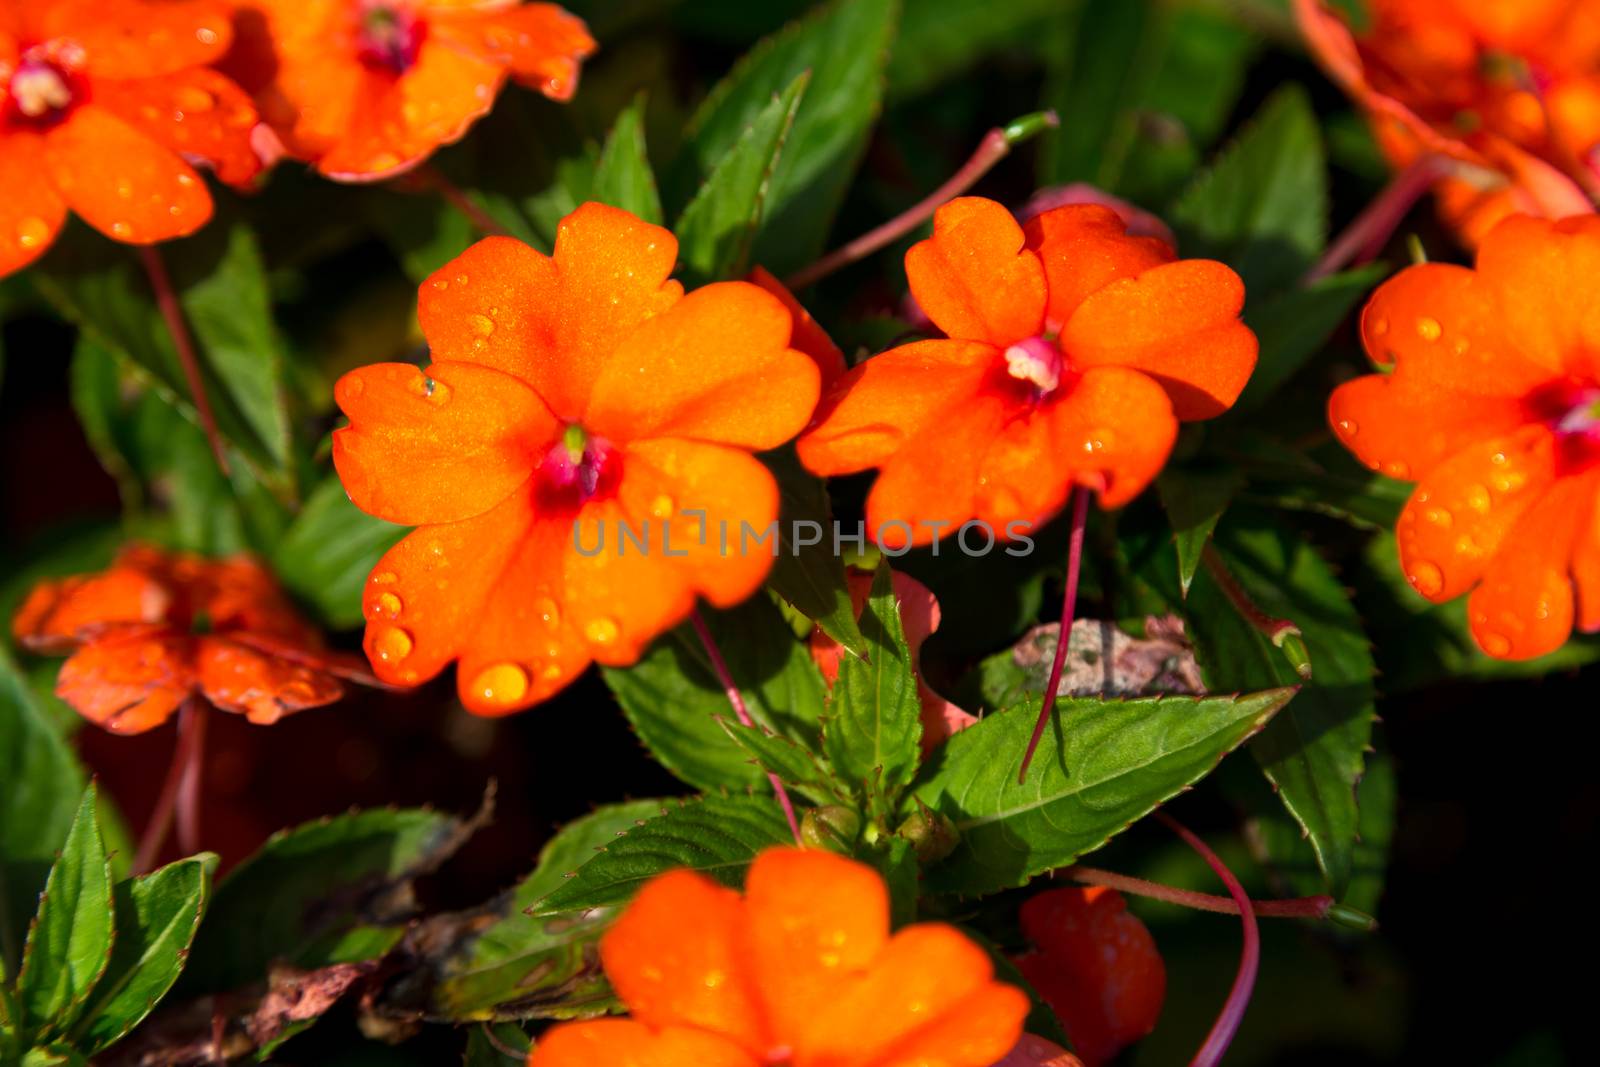 Orange flowers with drops of water on the flowers by 25ehaag6